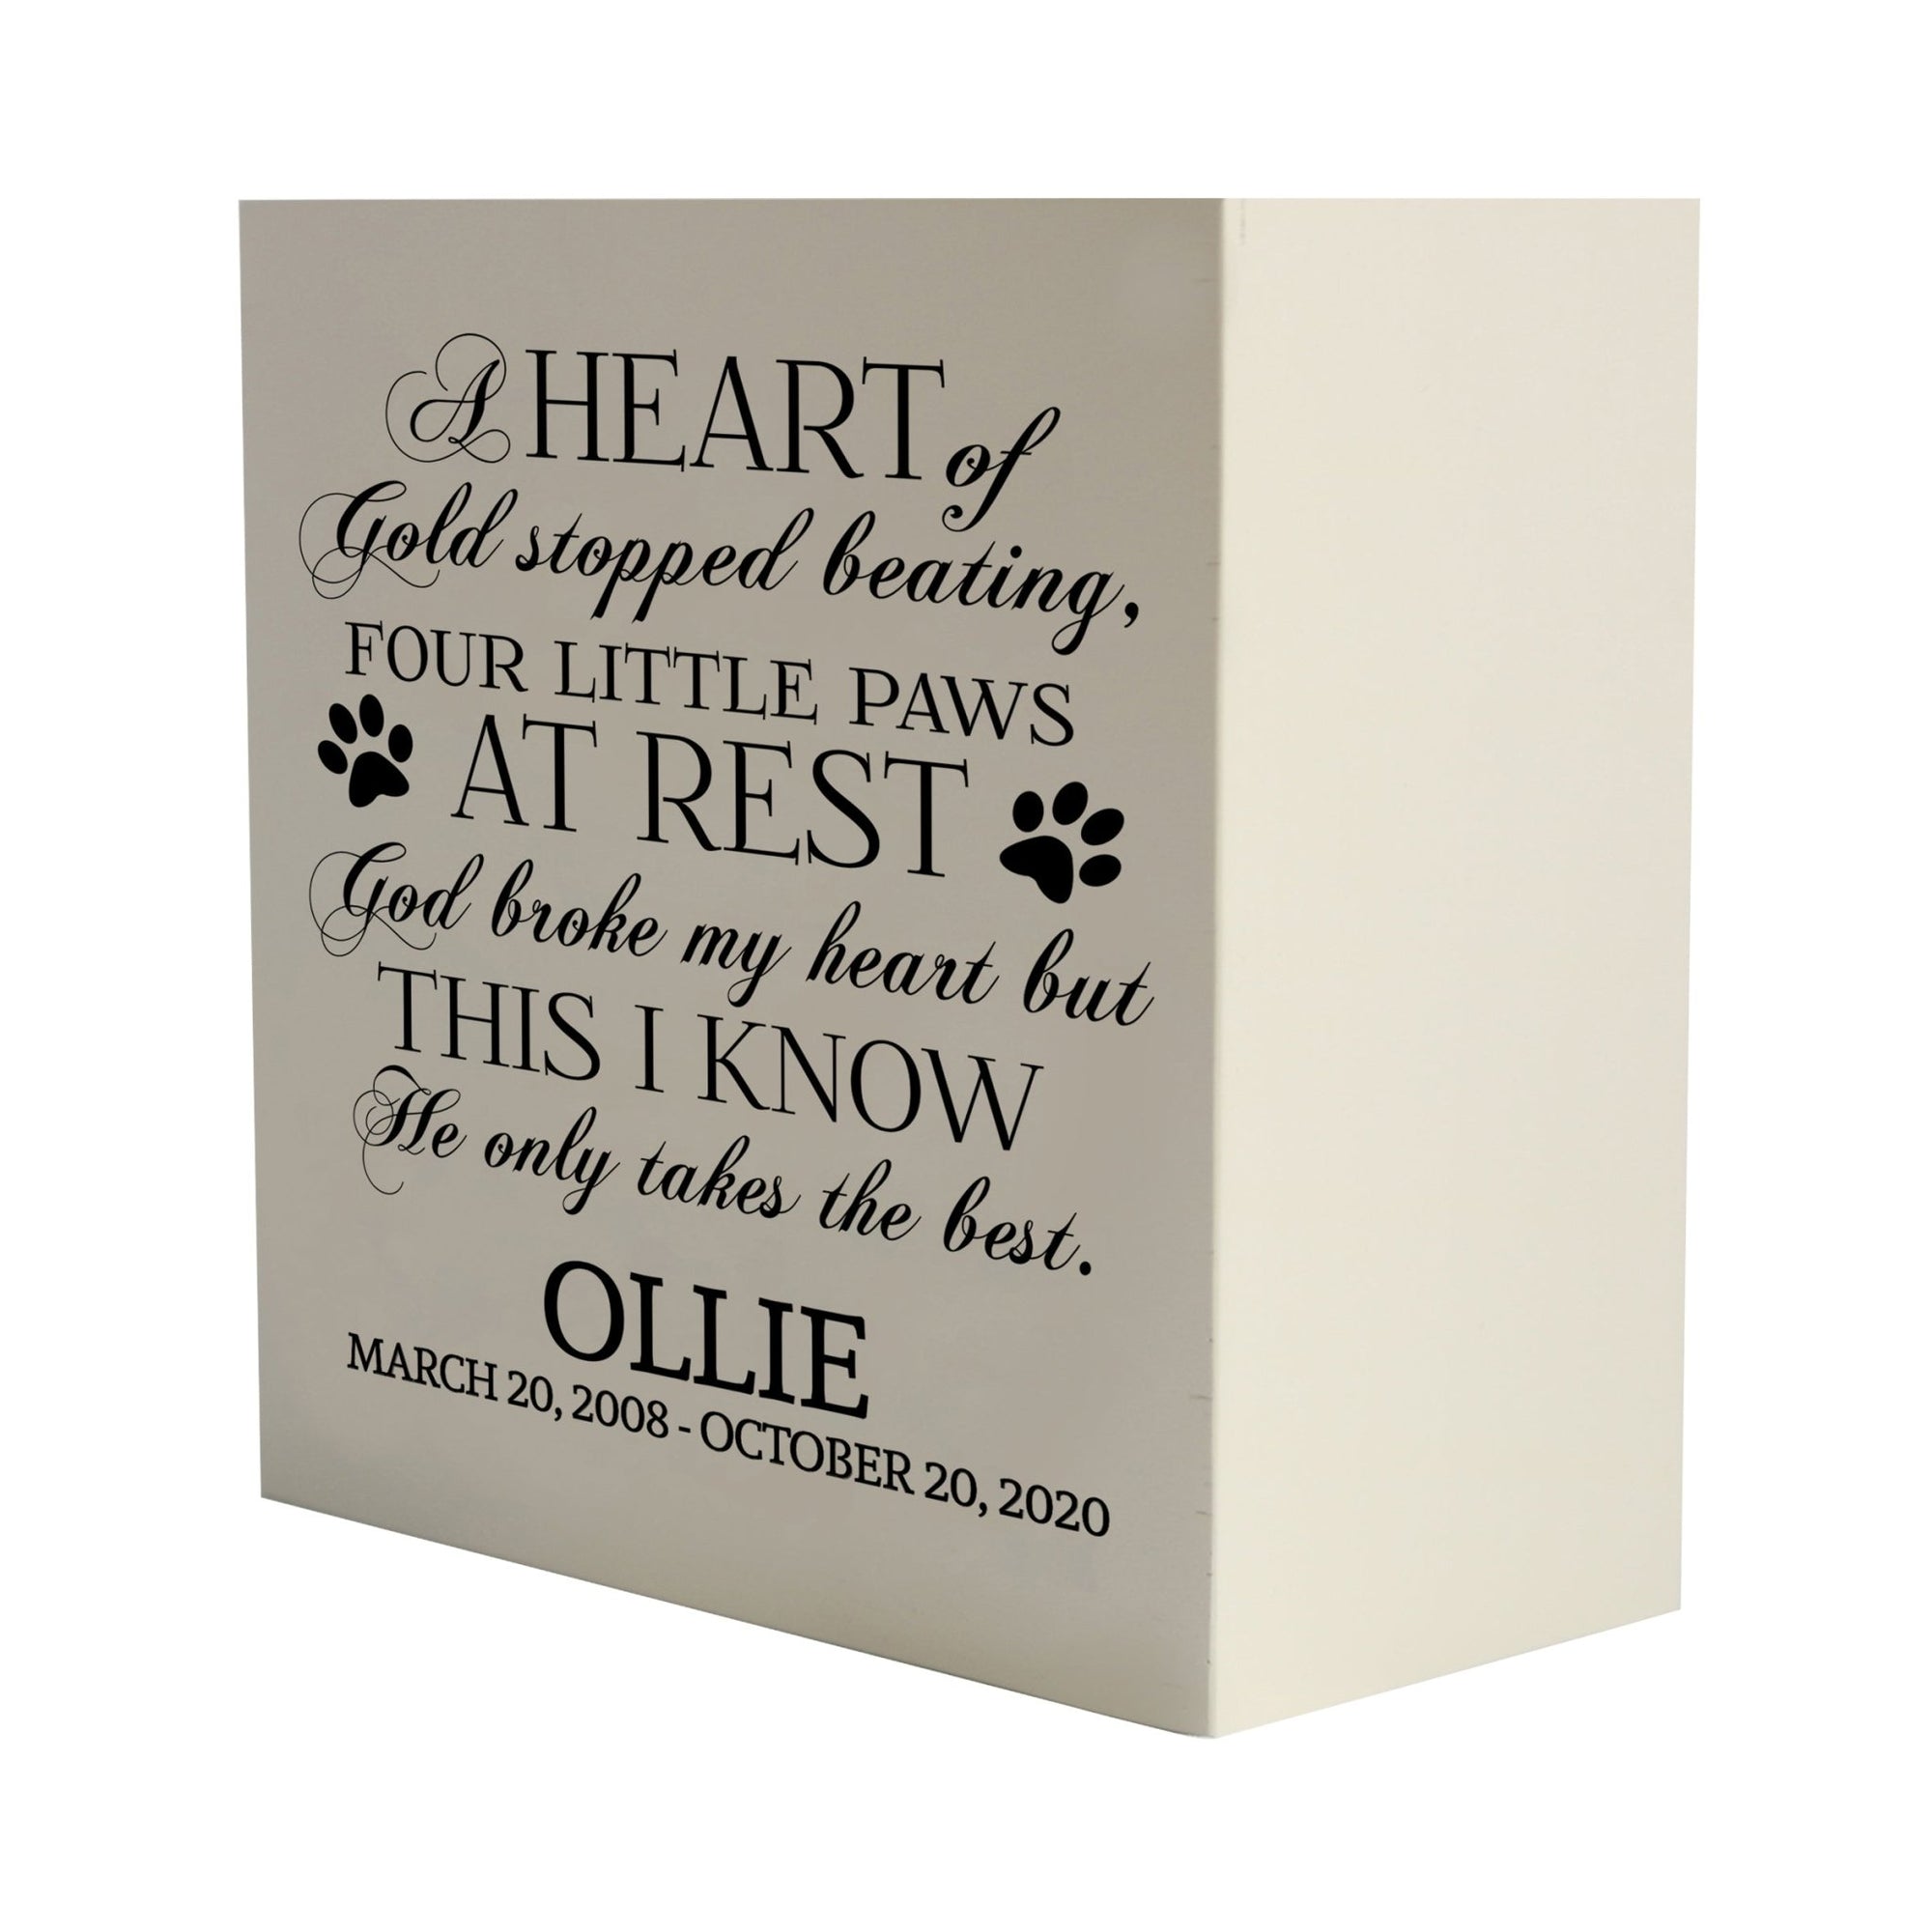 Pet Memorial Shadow Box Cremation Urn for Dog or Cat - A Heart of Gold - LifeSong Milestones